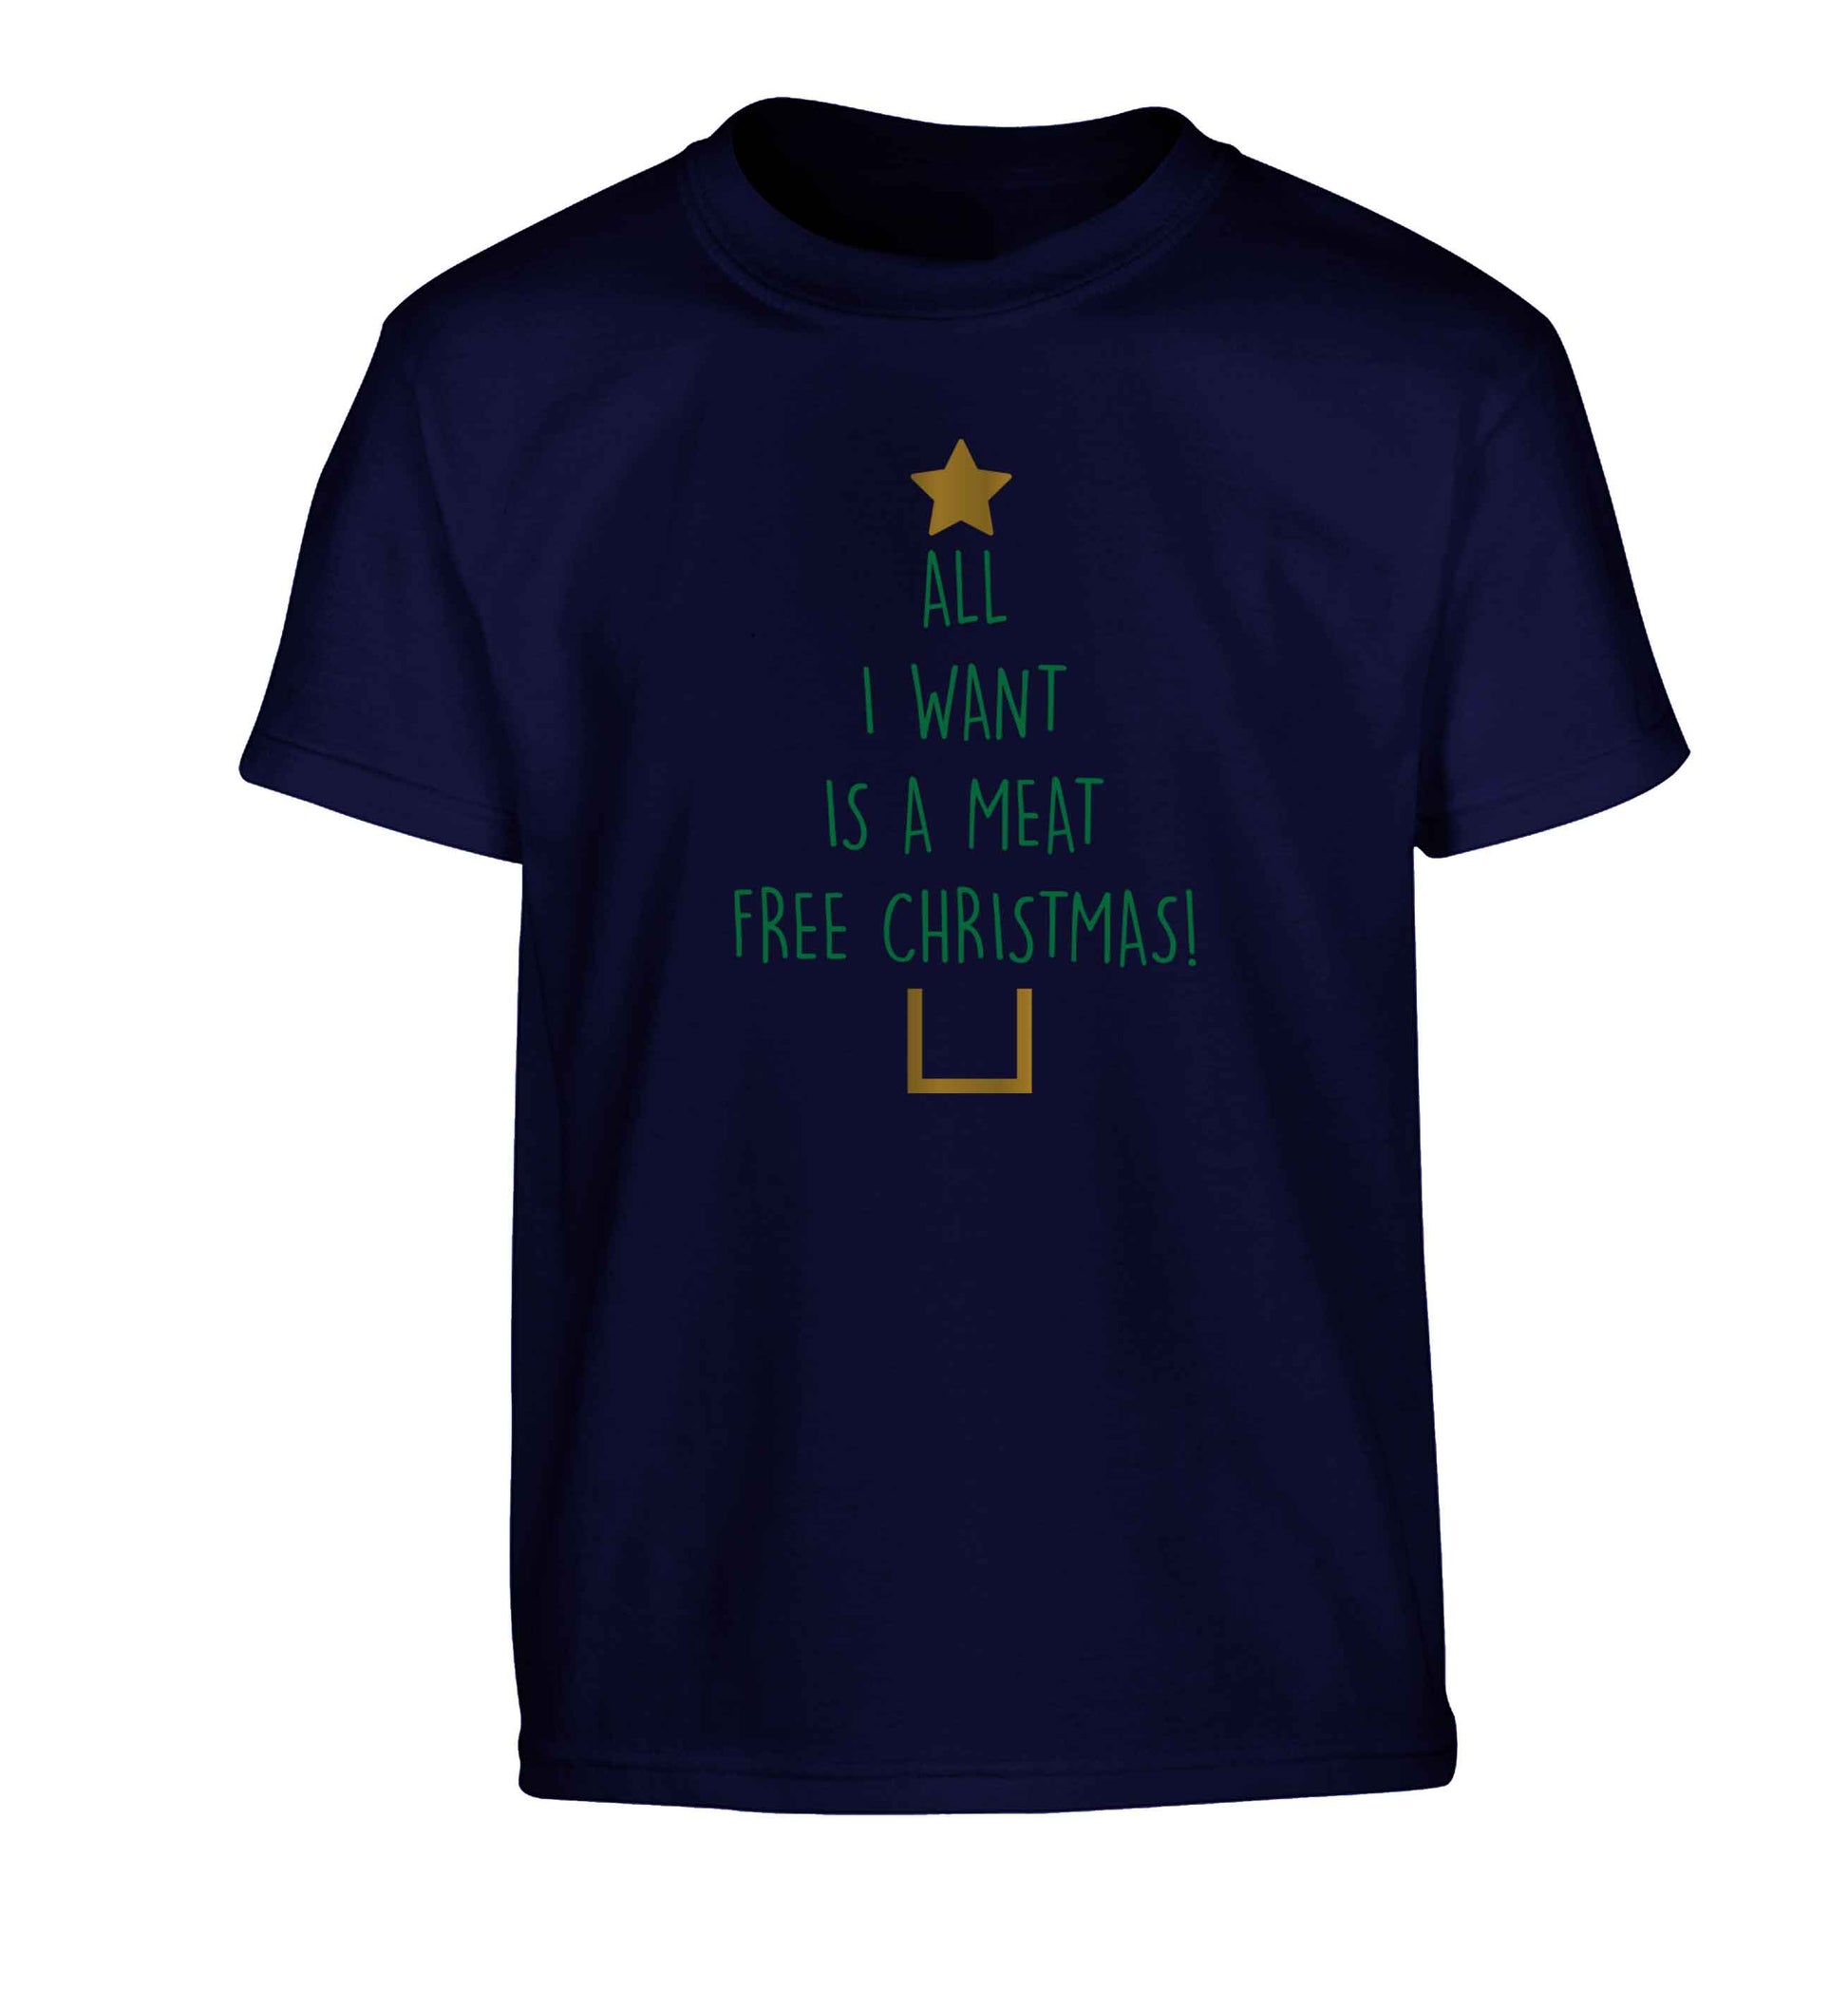 All I want is a meat free Christmas Children's navy Tshirt 12-13 Years